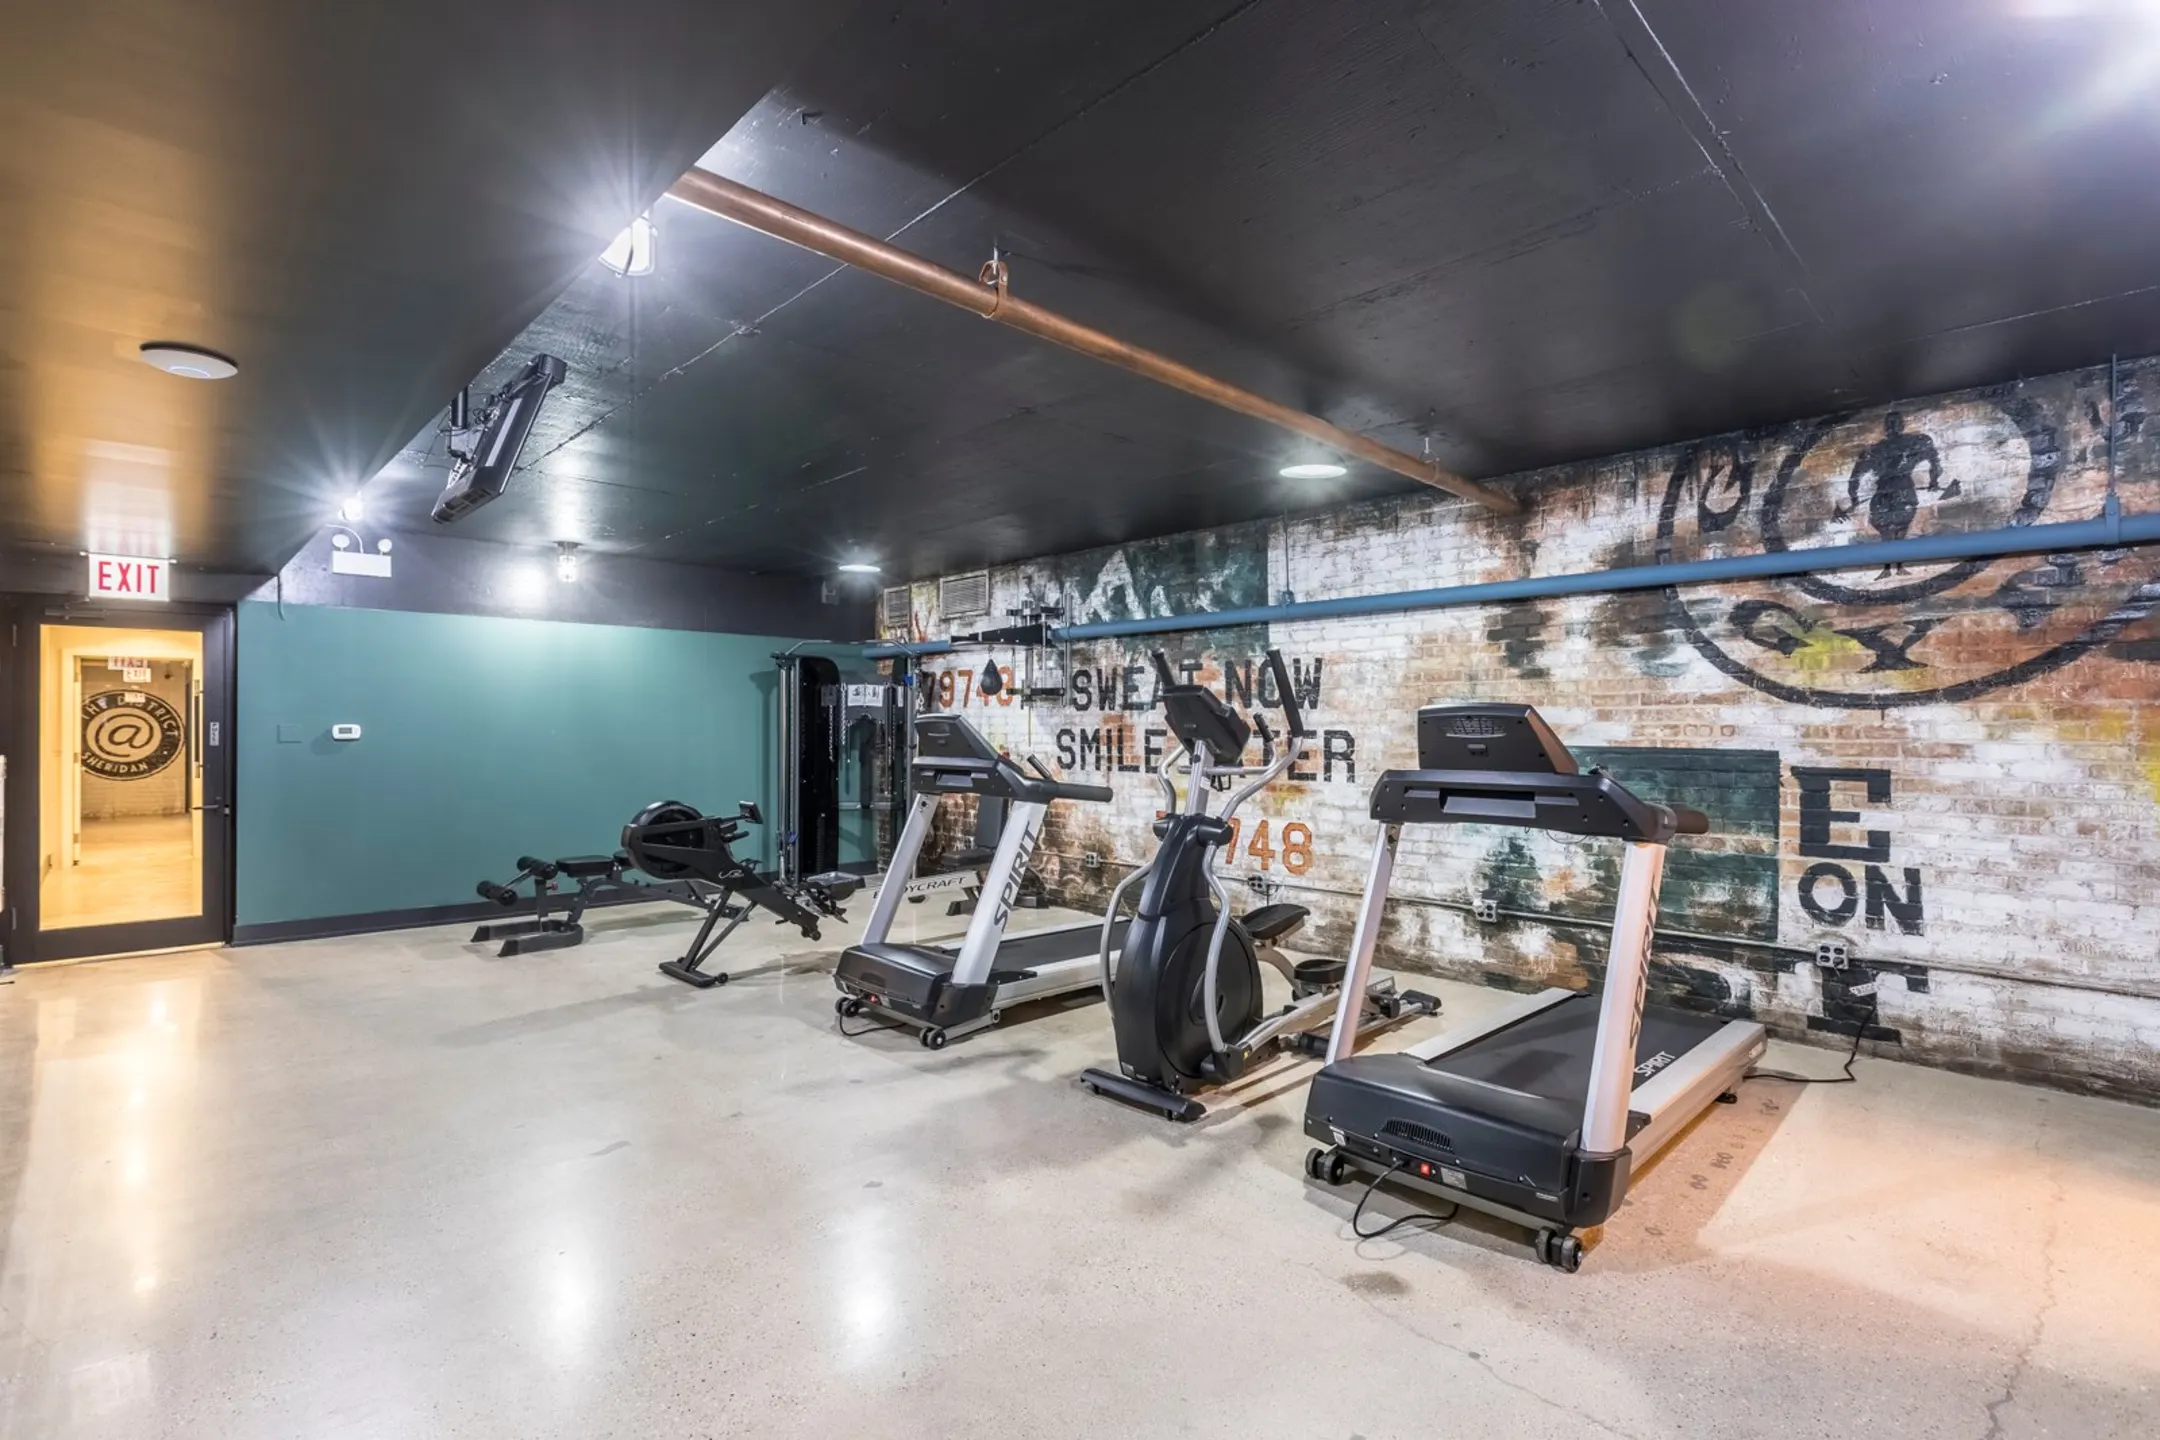 Fitness Weight Room - 5536 N Sheridan Road - Chicago, IL